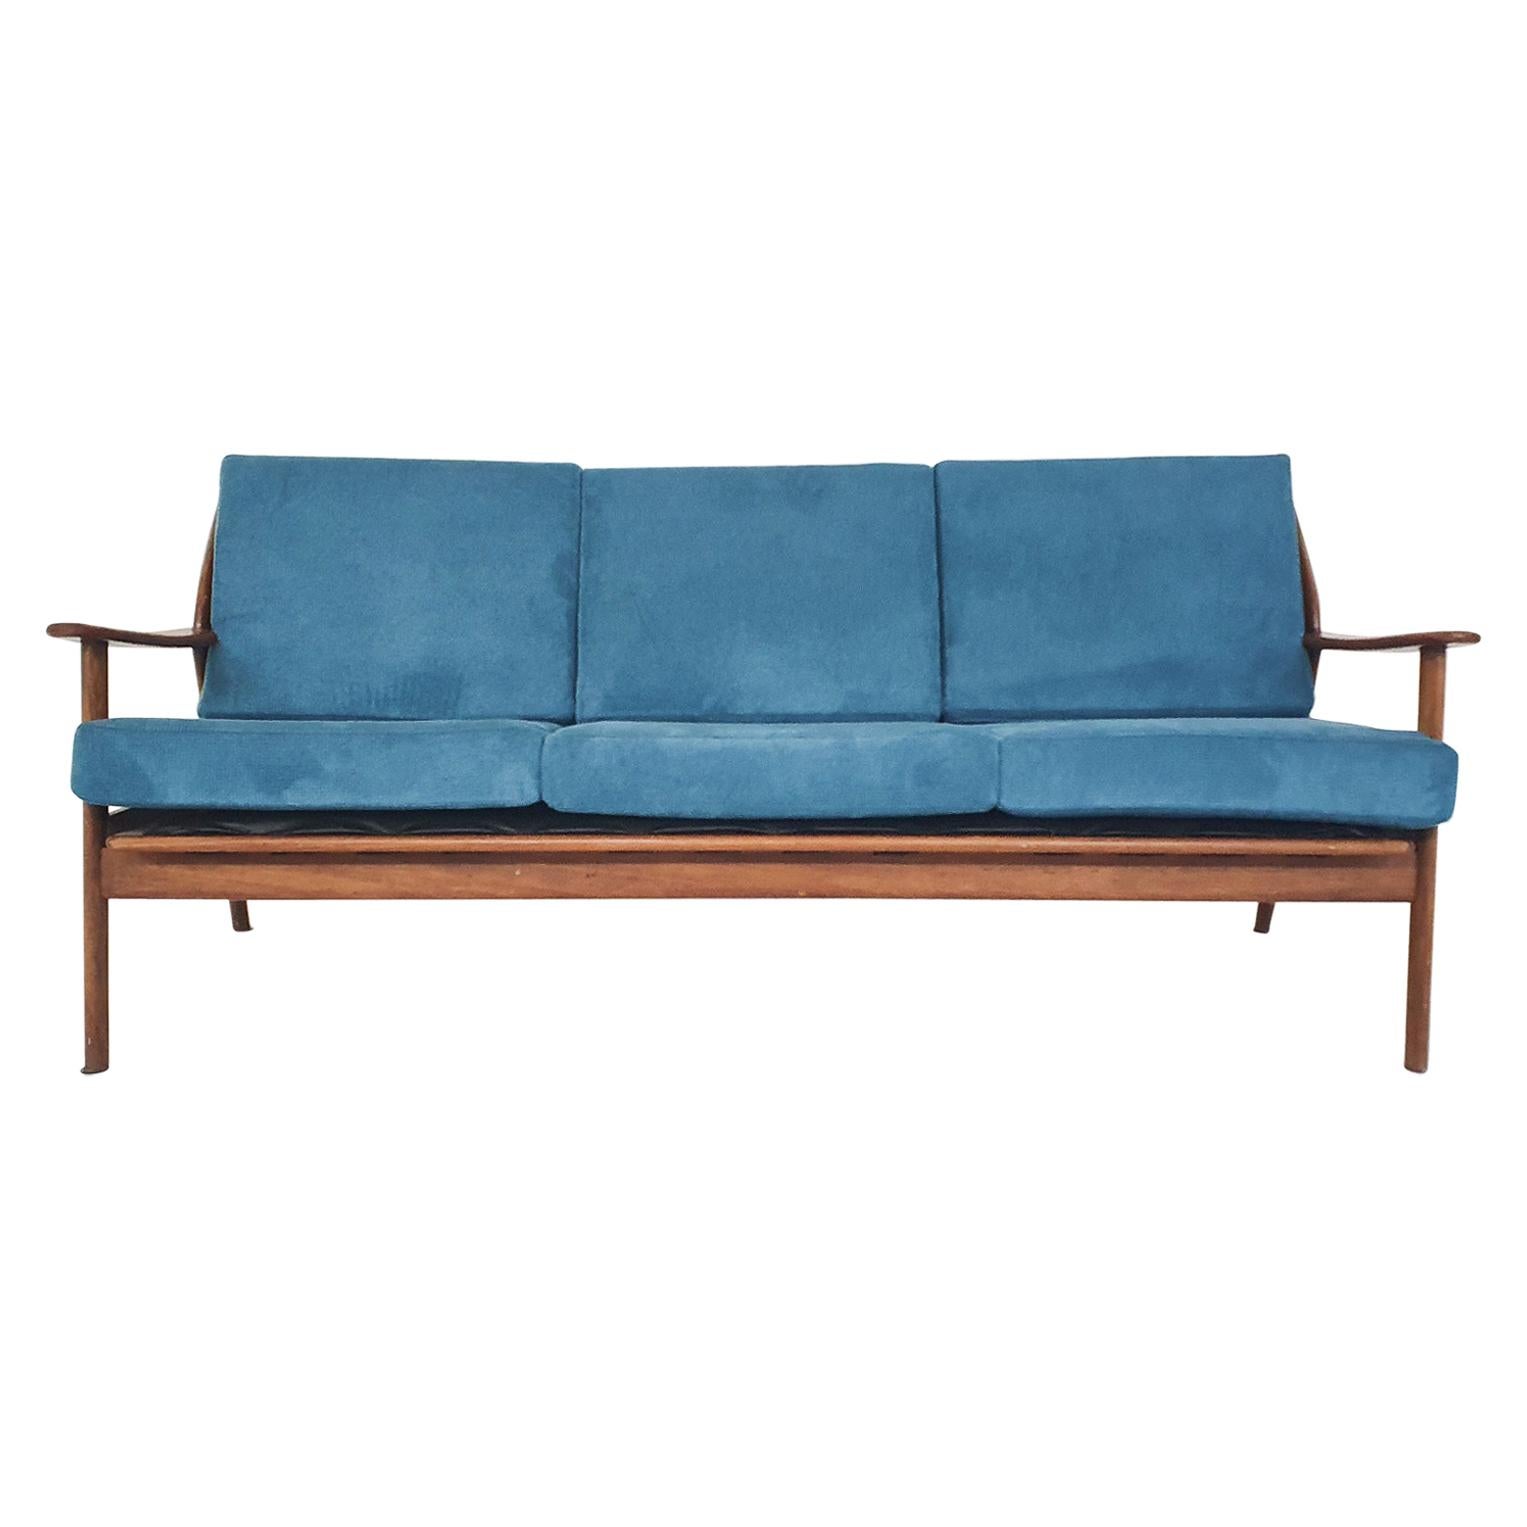 Mid-Century Teak Sofa with New Uphosltery, the Netherlands, 1960's